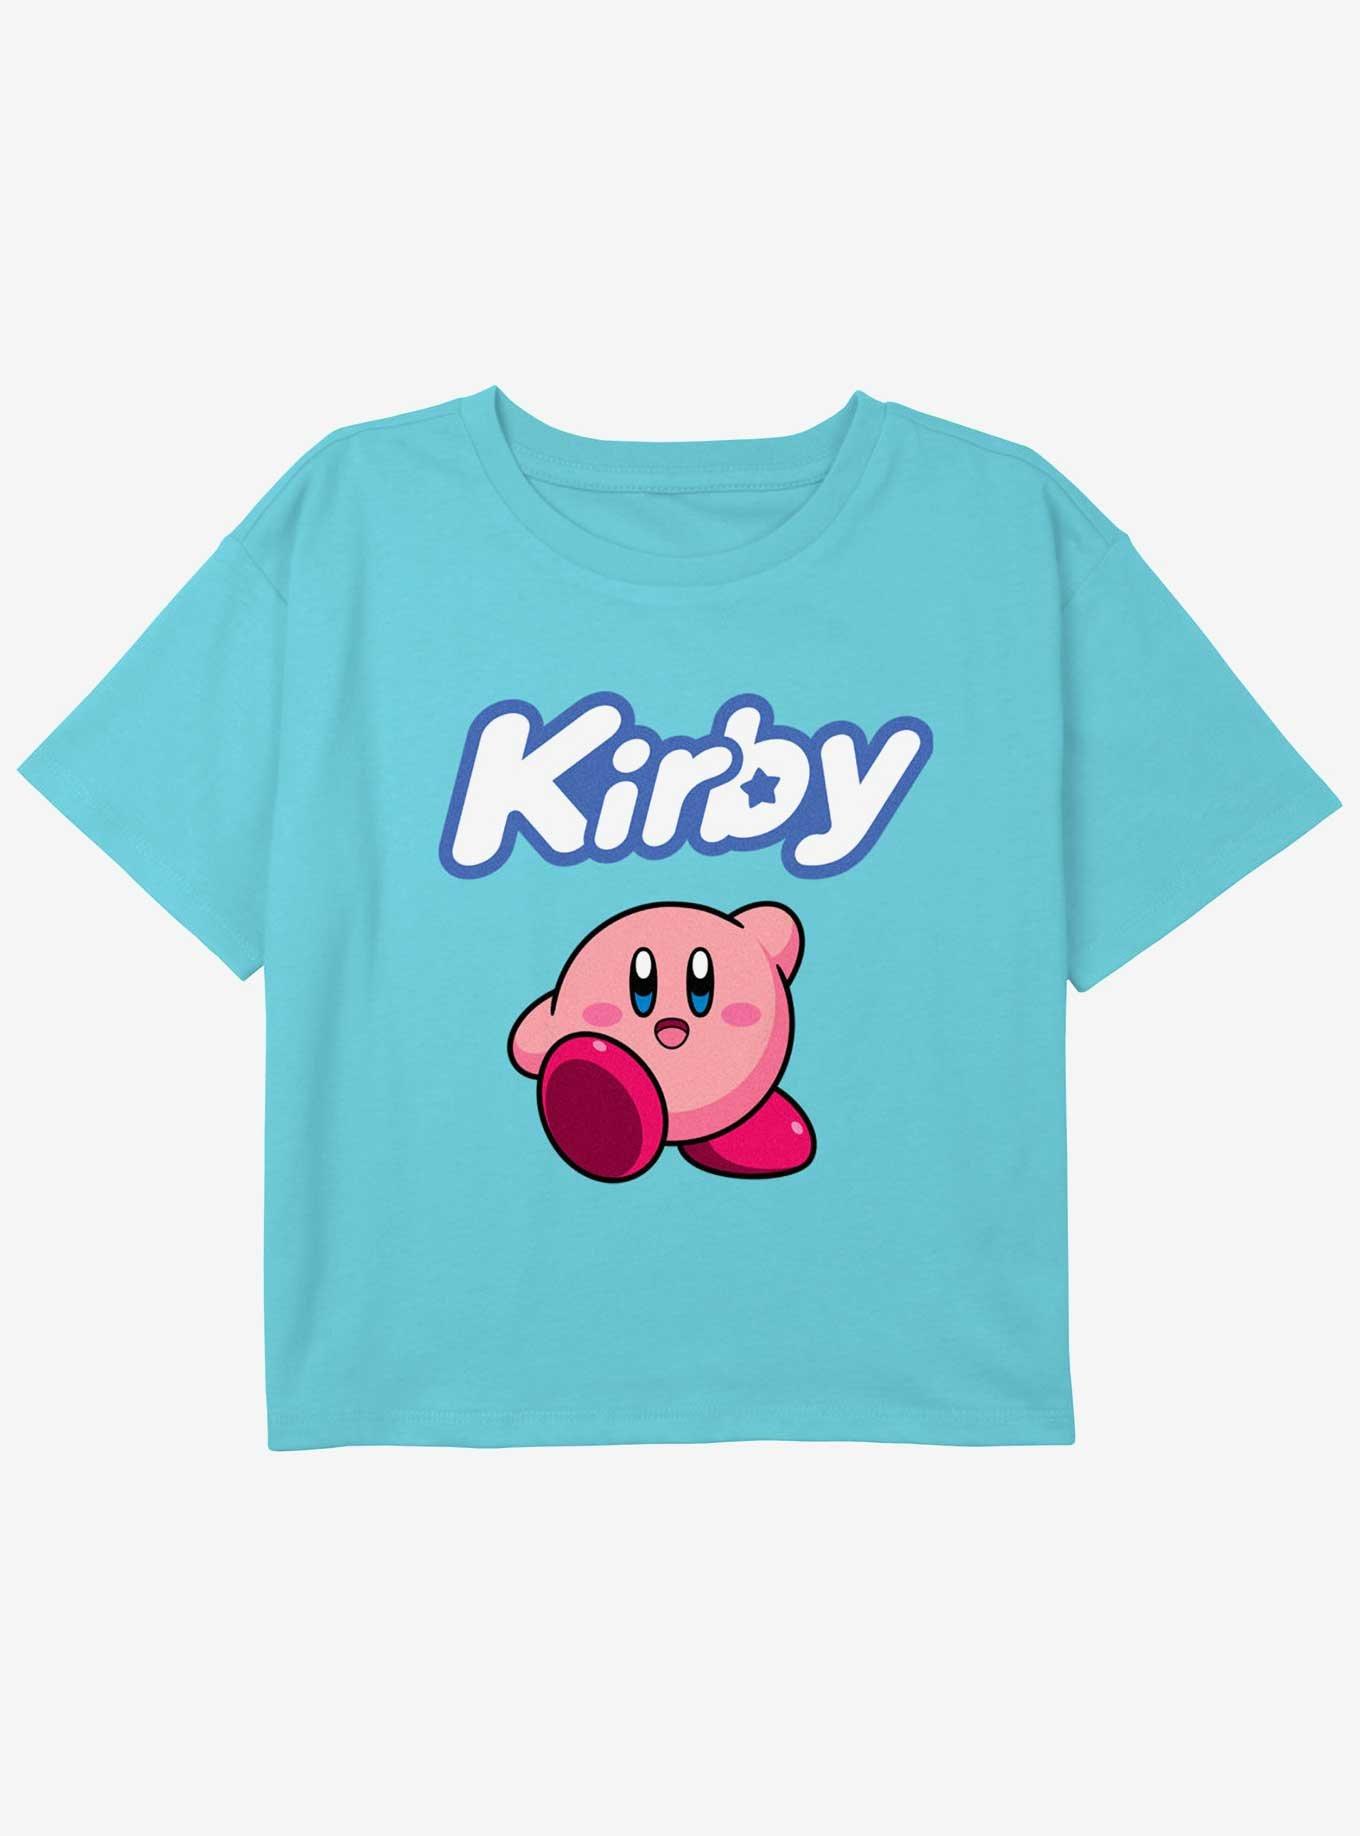 Kirby Simply Kirby Youth Girls Boxy Crop T-Shirt, BLUE, hi-res